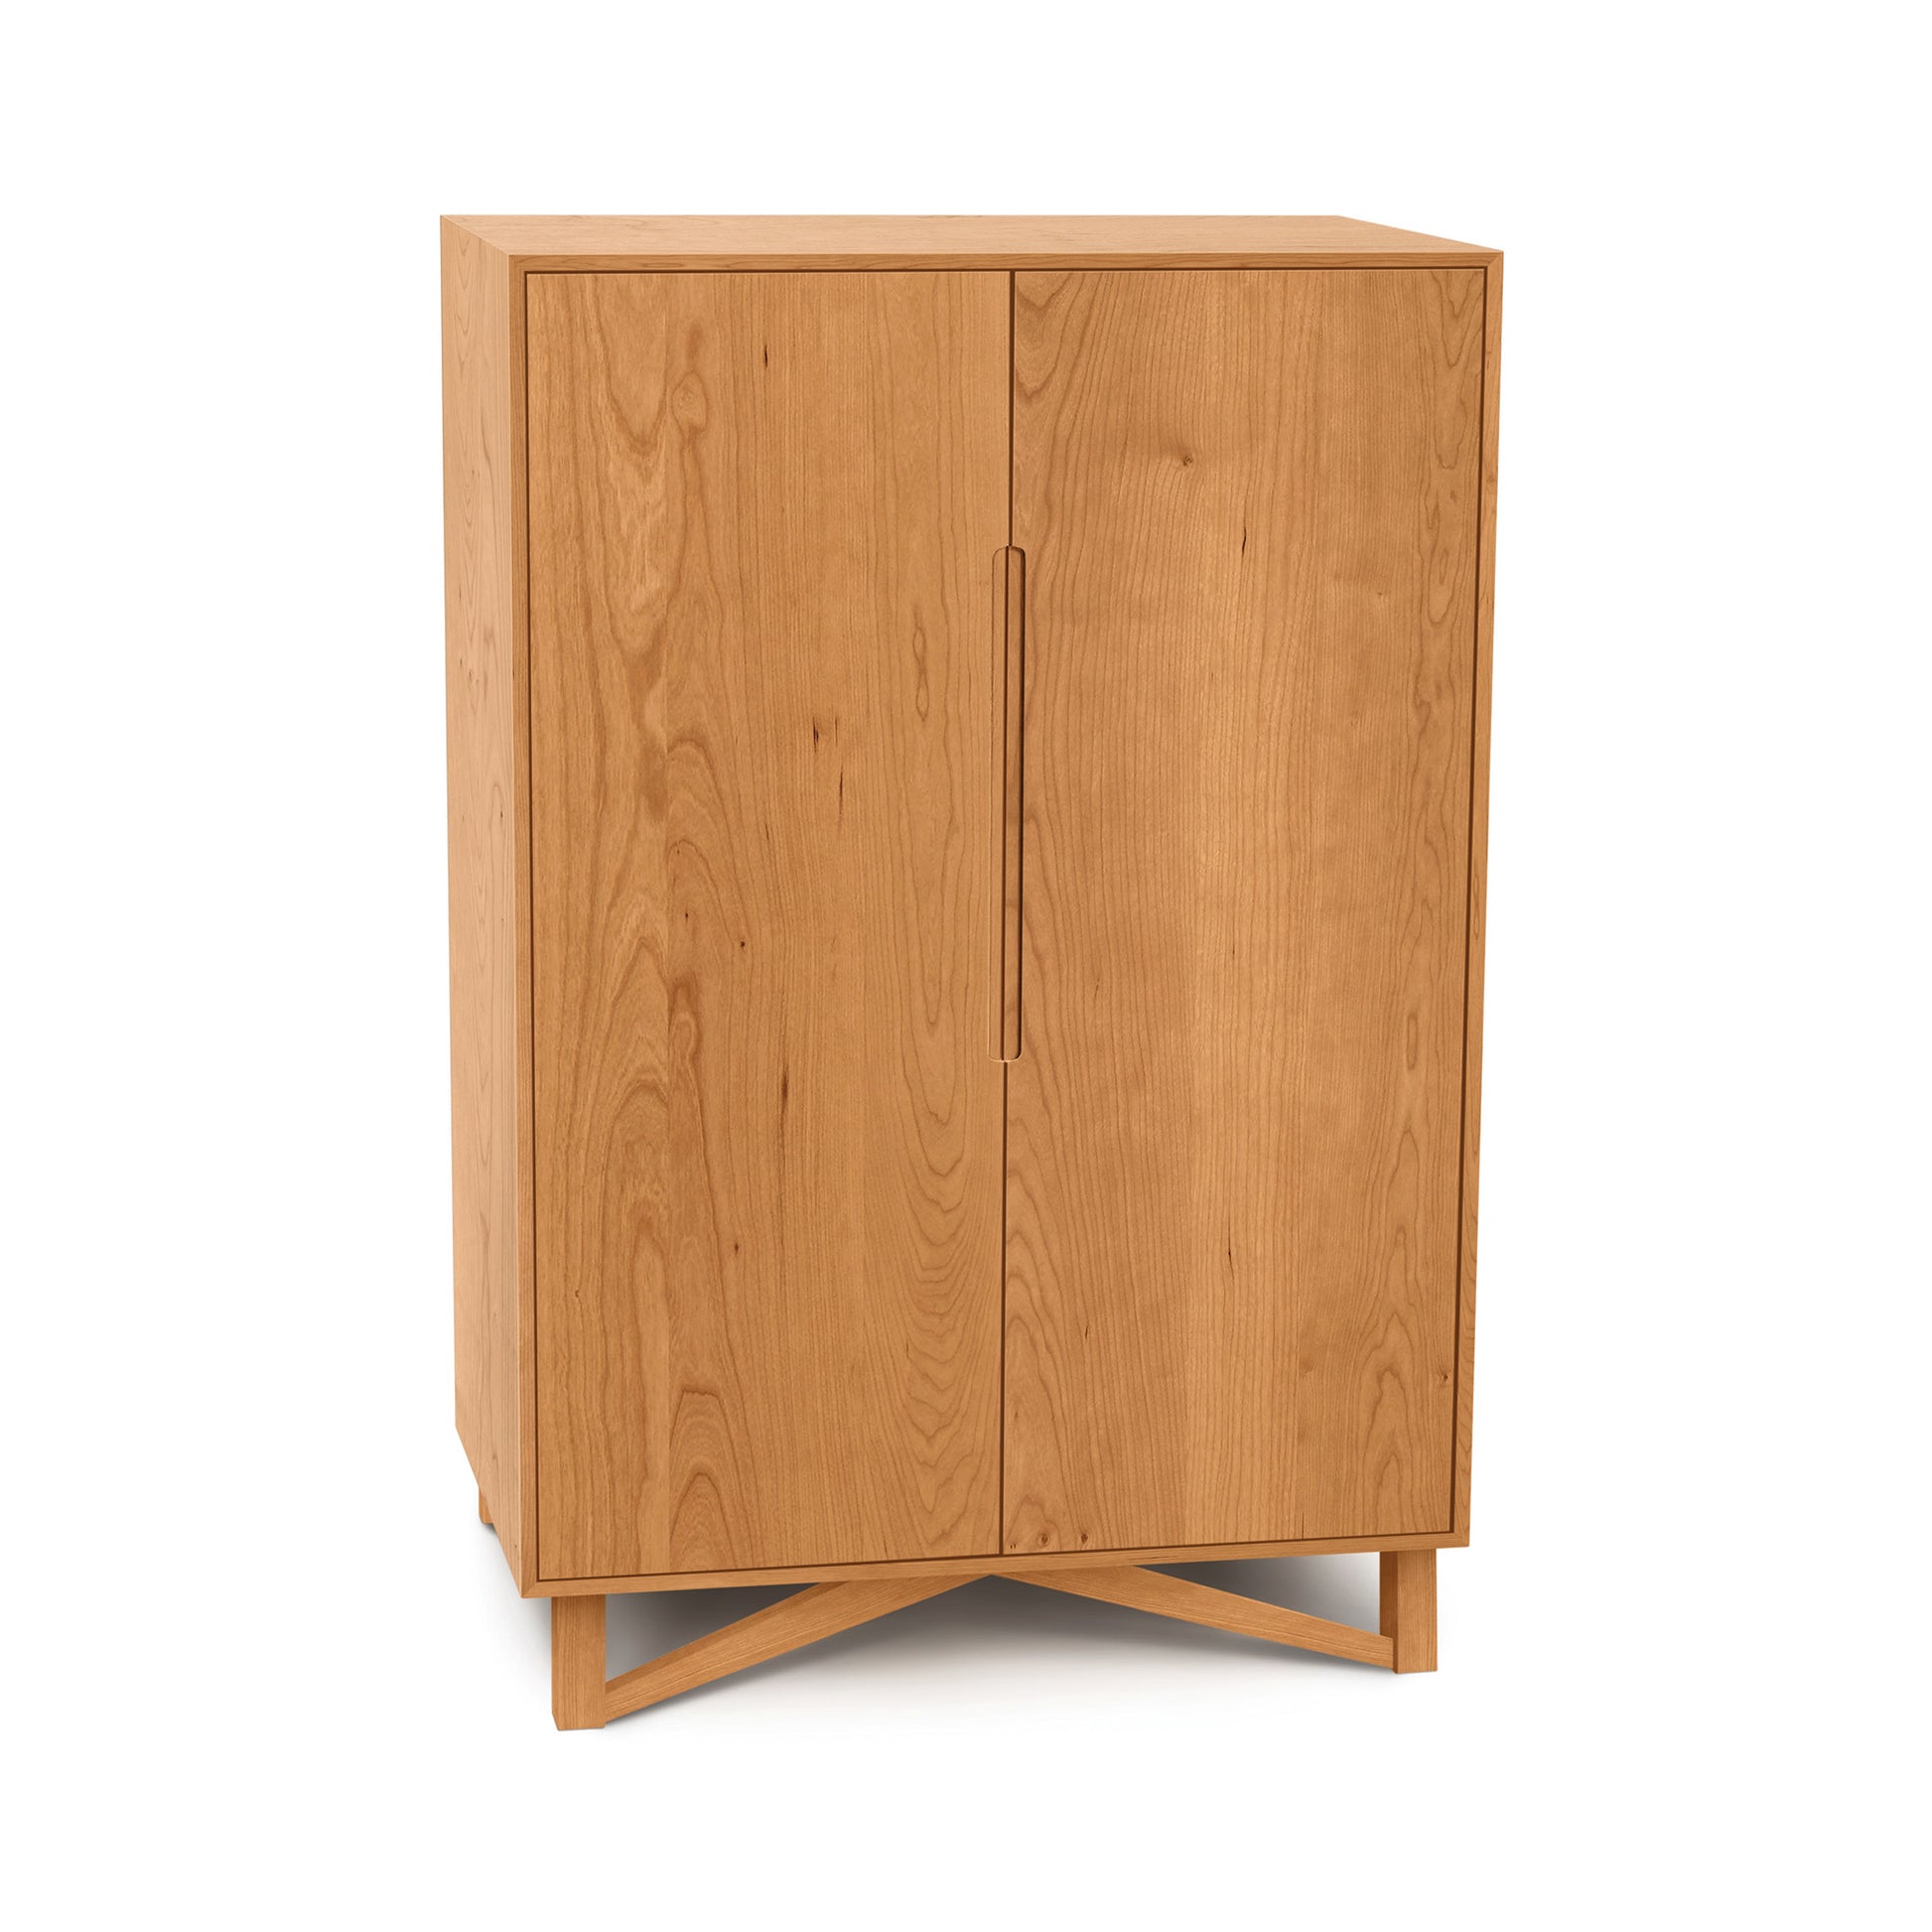 A Copeland Furniture Exeter Bar Cabinet with two doors, standing on angled legs, isolated against a white background.